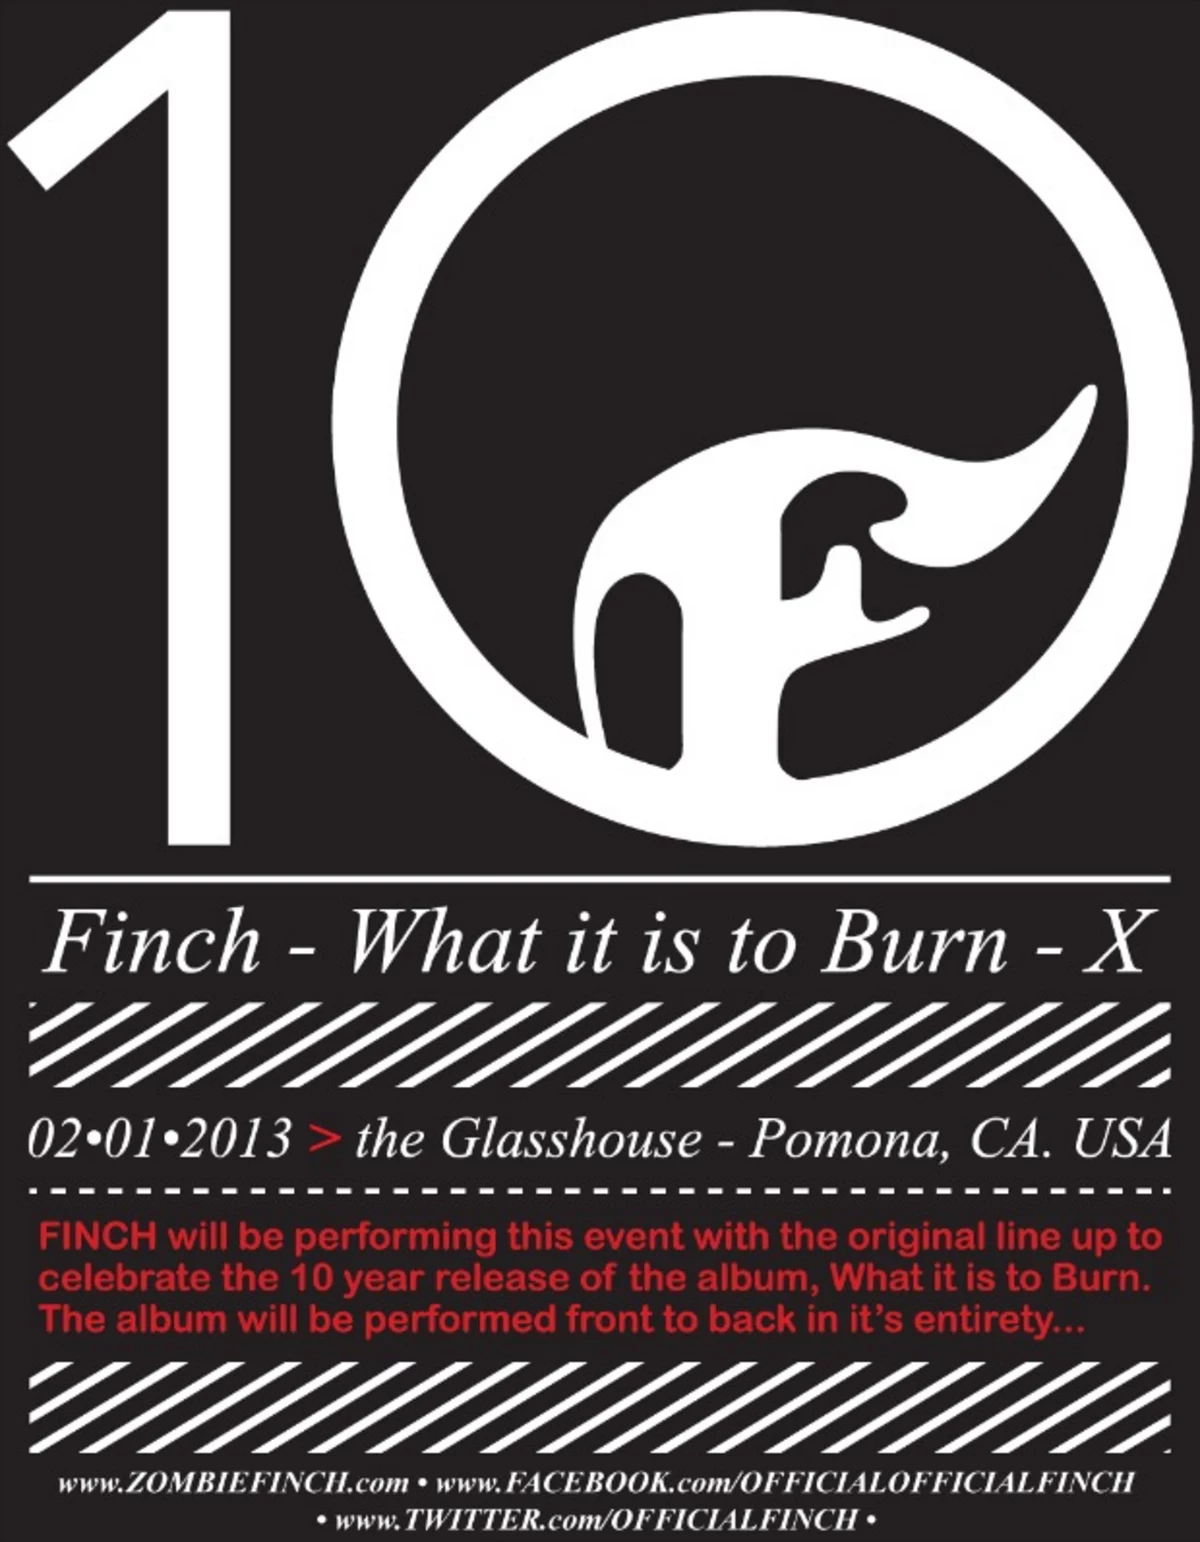 Exclusive Finch reunite to commemorate 10th anniversary of ‘What It Is